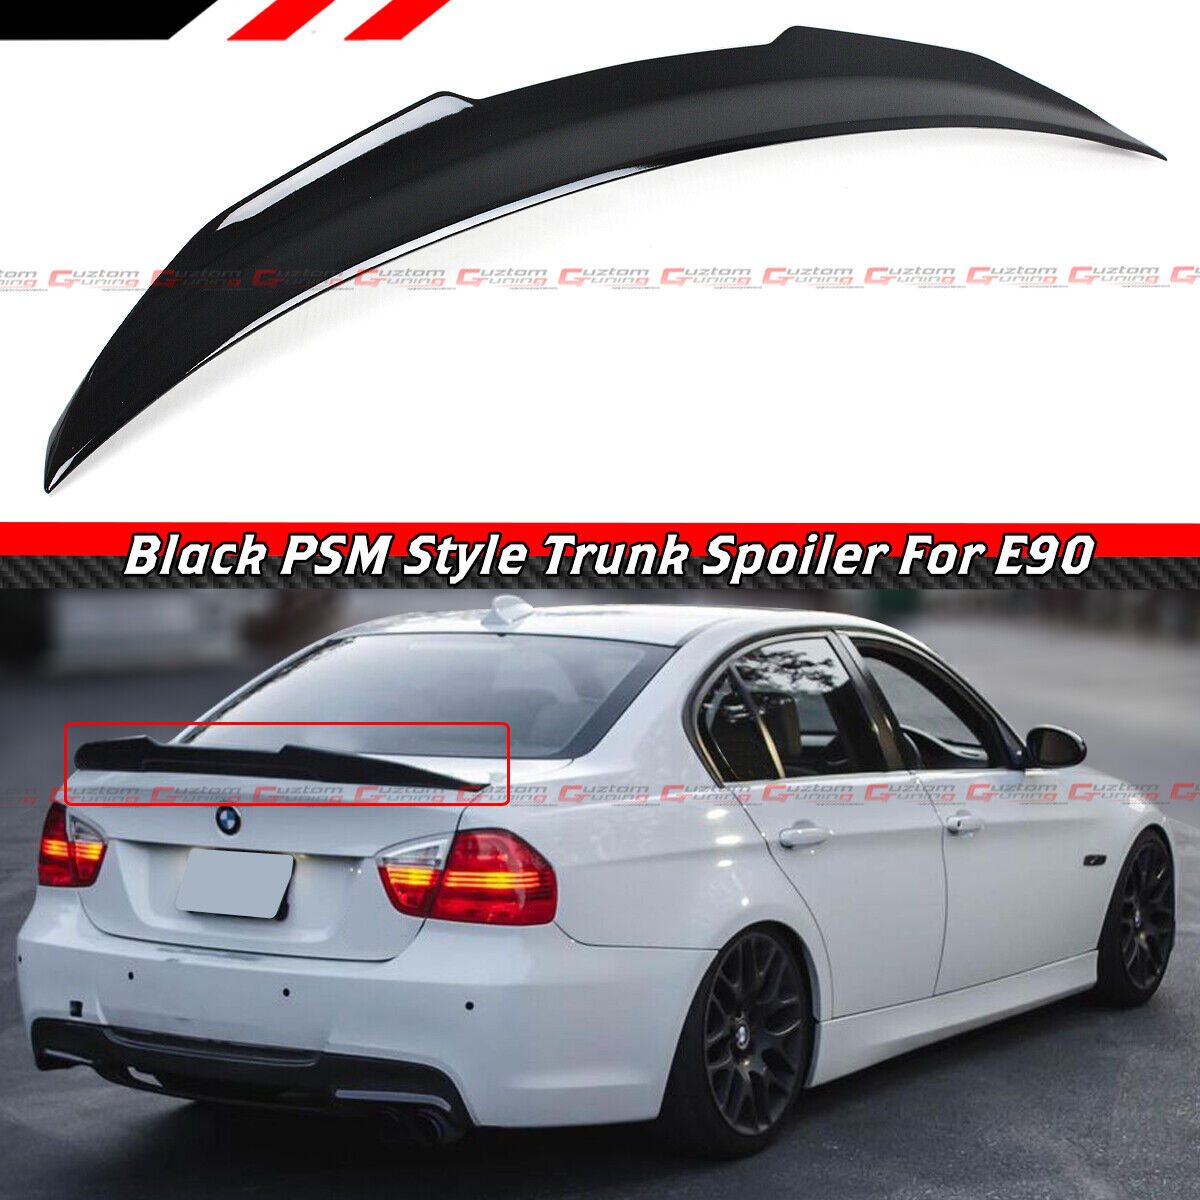 FOR 2006-11 BMW E90 3 SERIES M3 SEDAN PSM STYLE GLOSSY BLACK TRUNK SPOILER WING